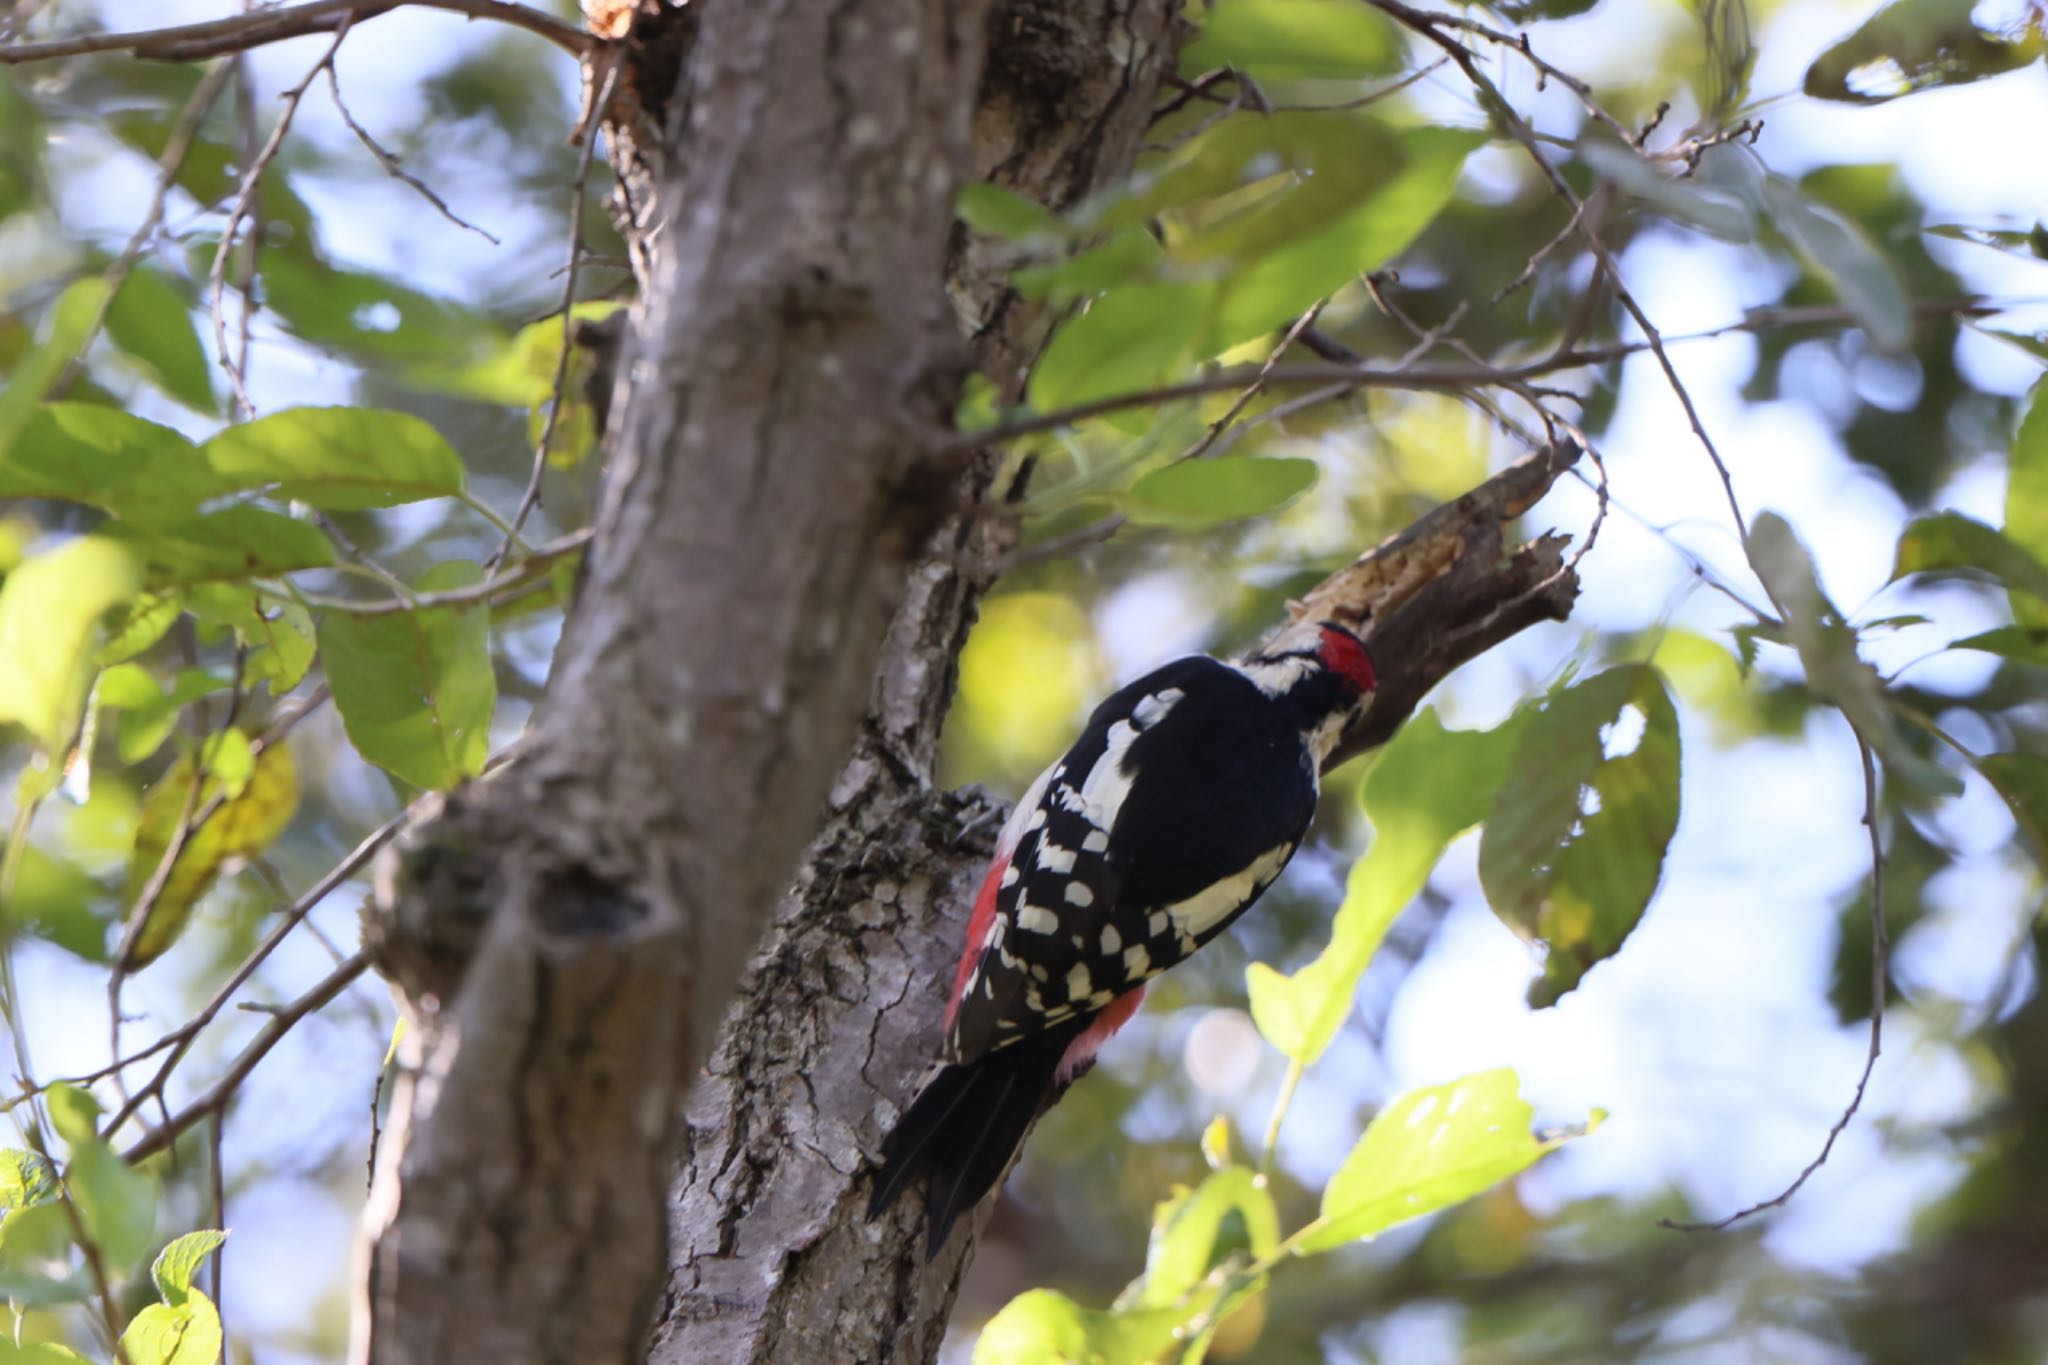 Photo of Great Spotted Woodpecker at Mizumoto Park by atushiever